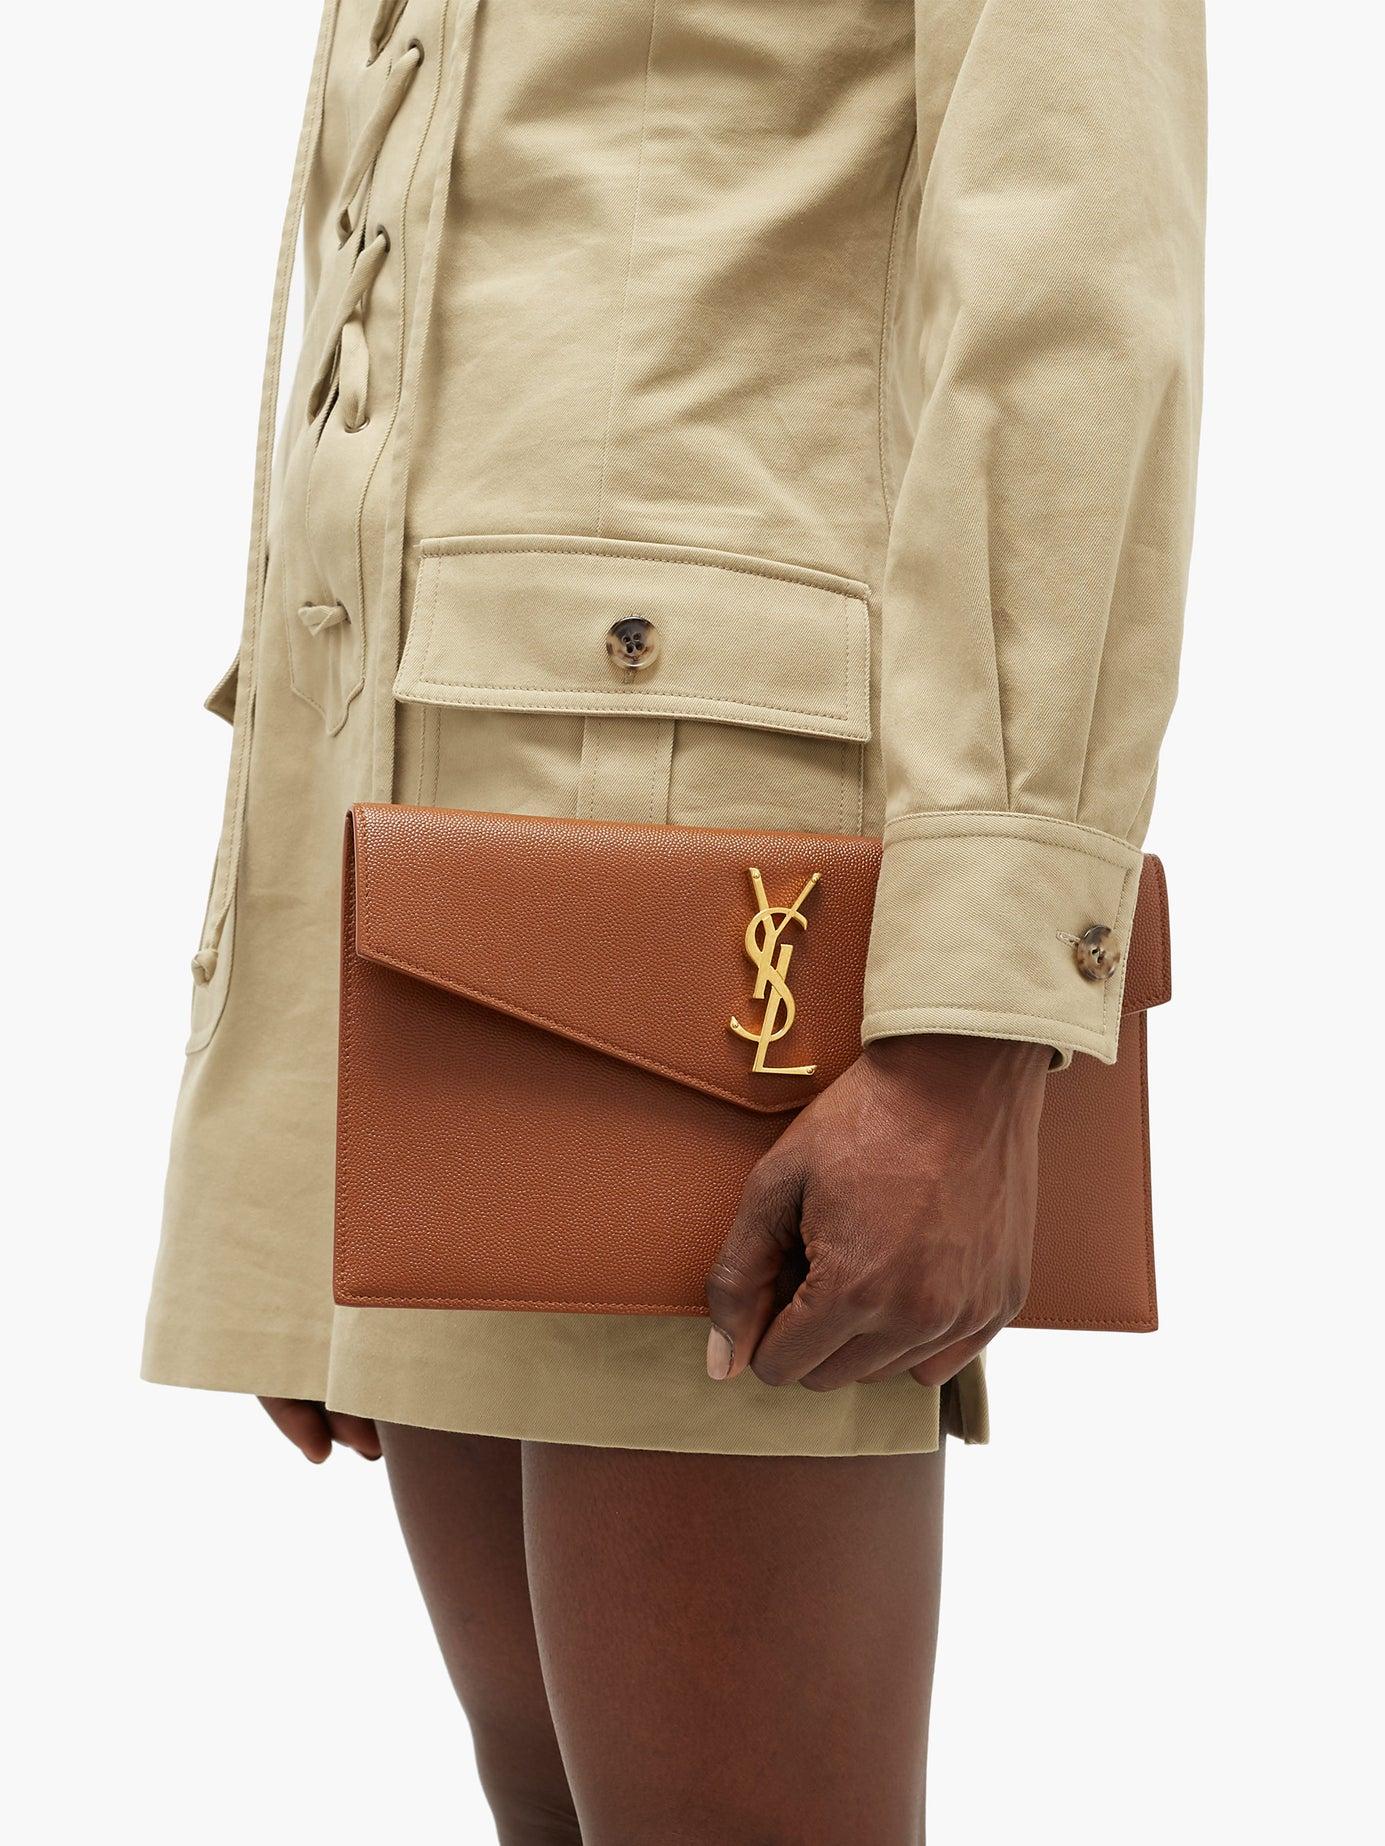 Saint Laurent Uptown Leather Clutch Bag in Brown | Lyst